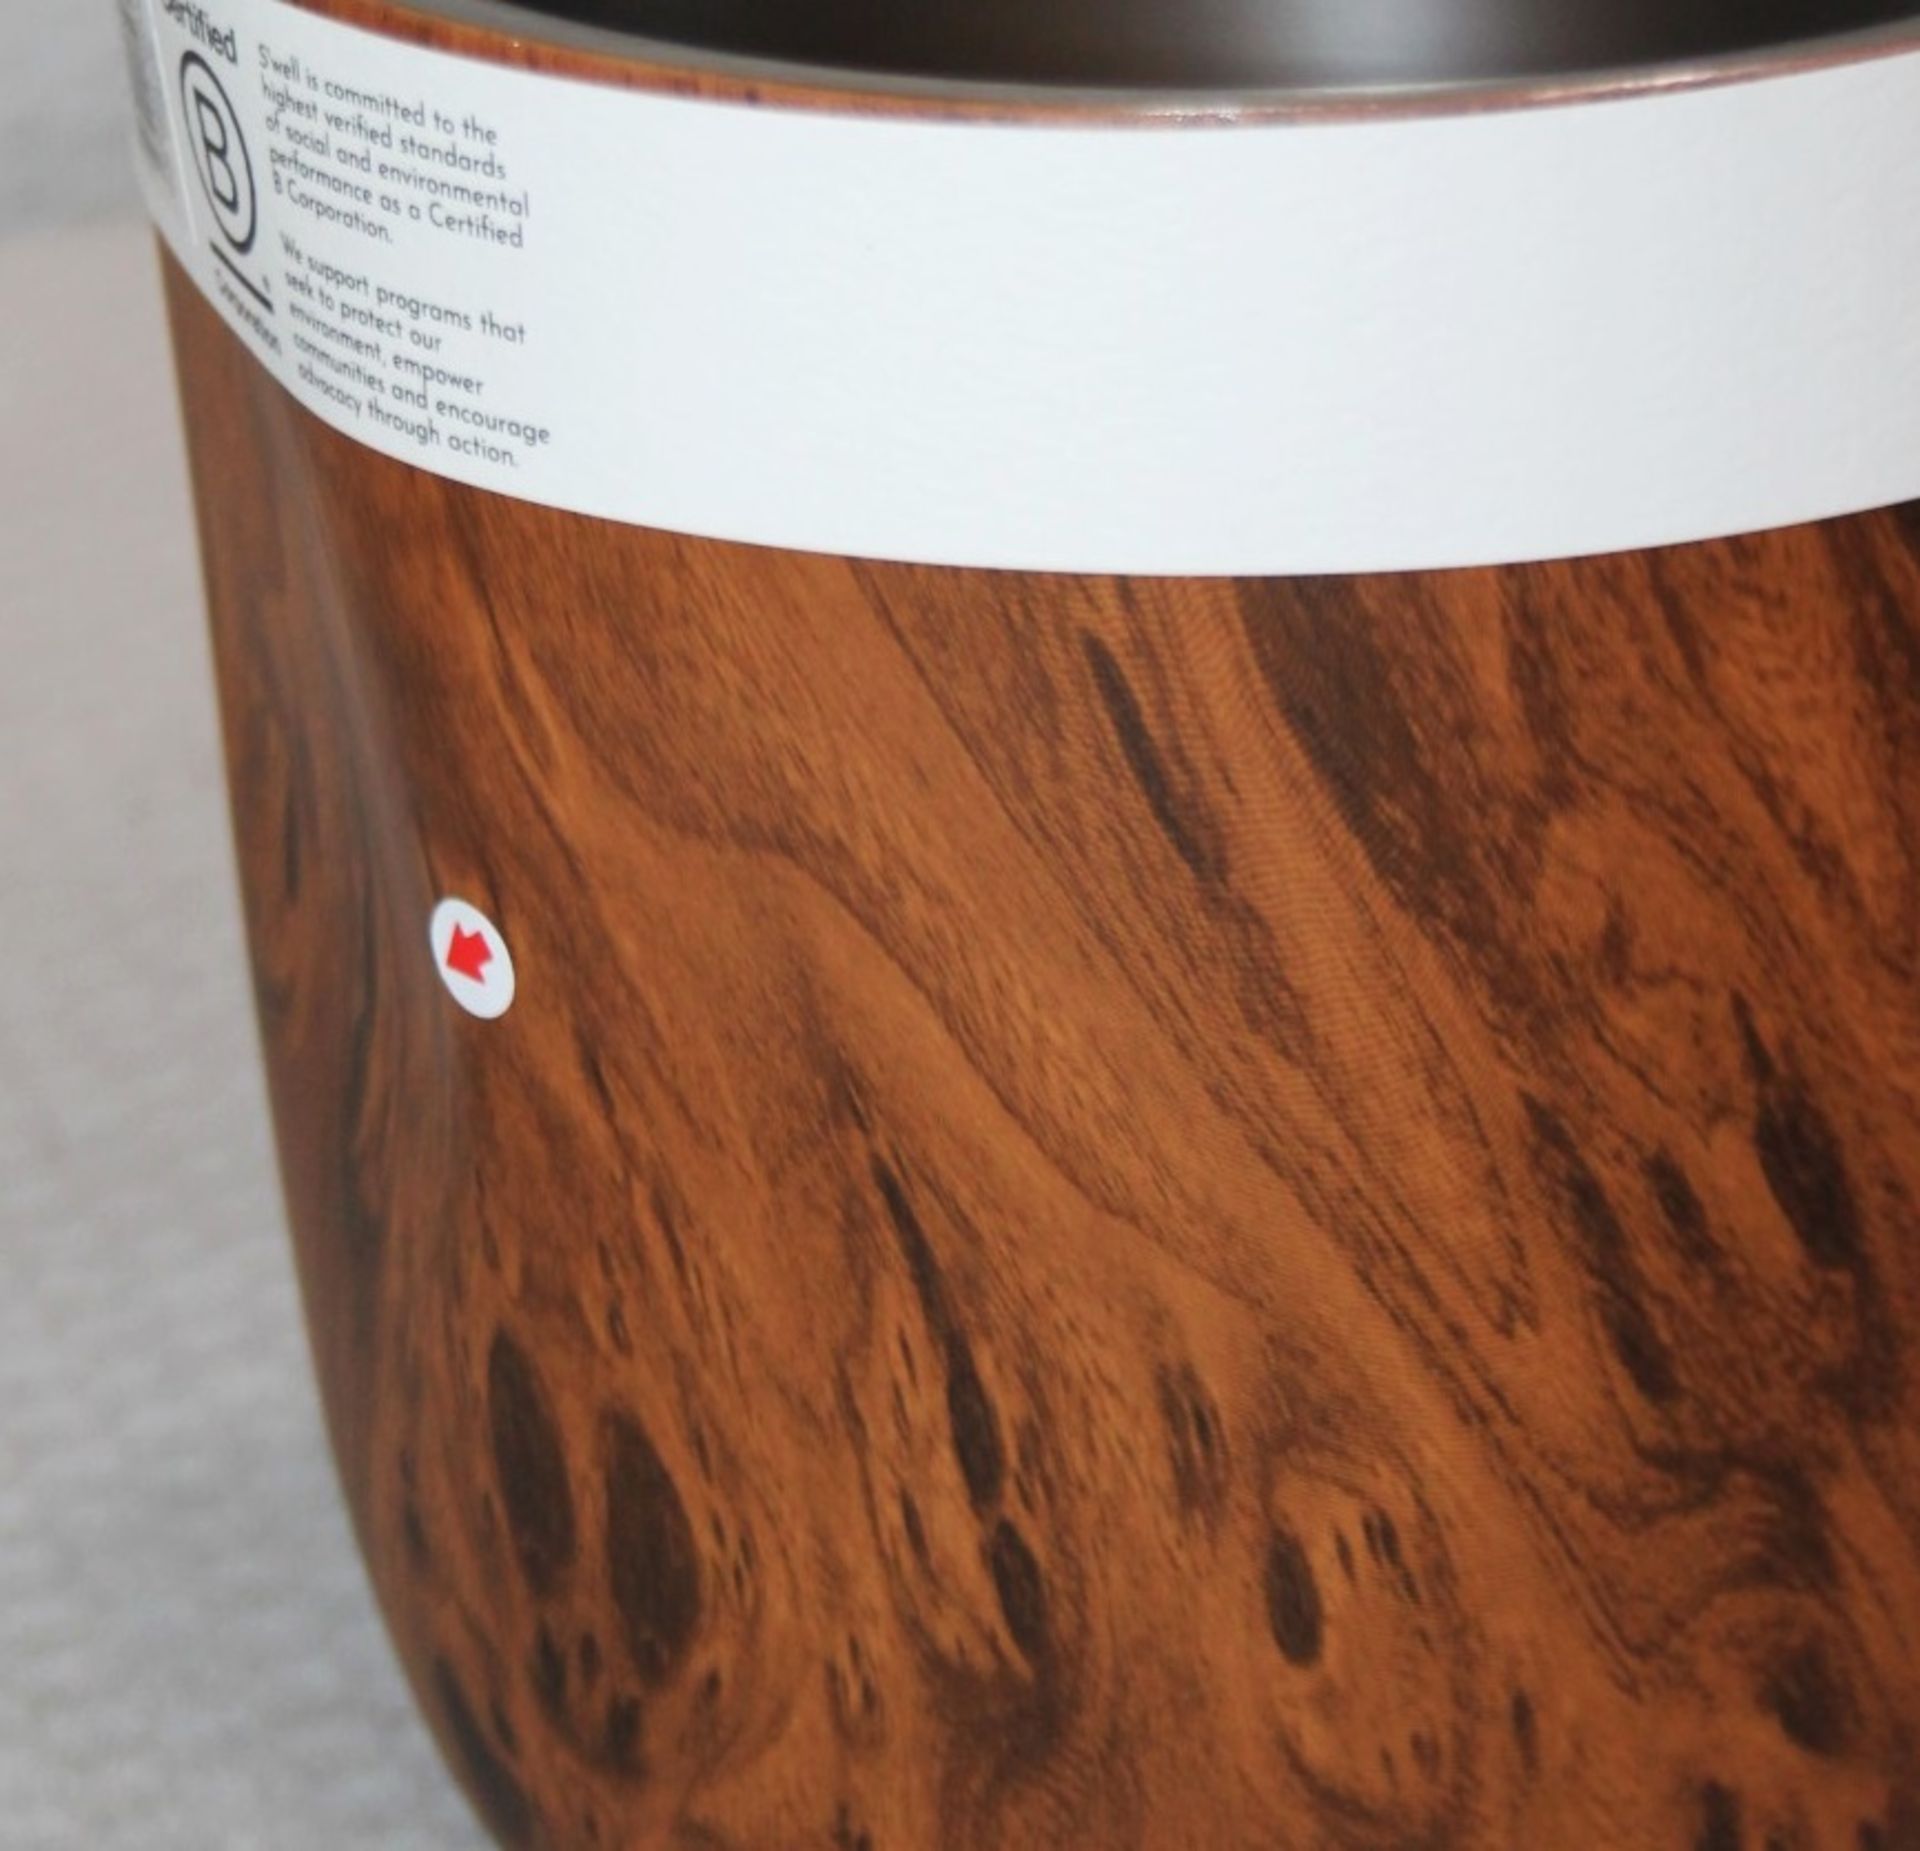 1 x S'WELL Designer Ice Bucket With Teakwood Effect Finish - Includes Tongs - Original Price £50. - Image 5 of 8